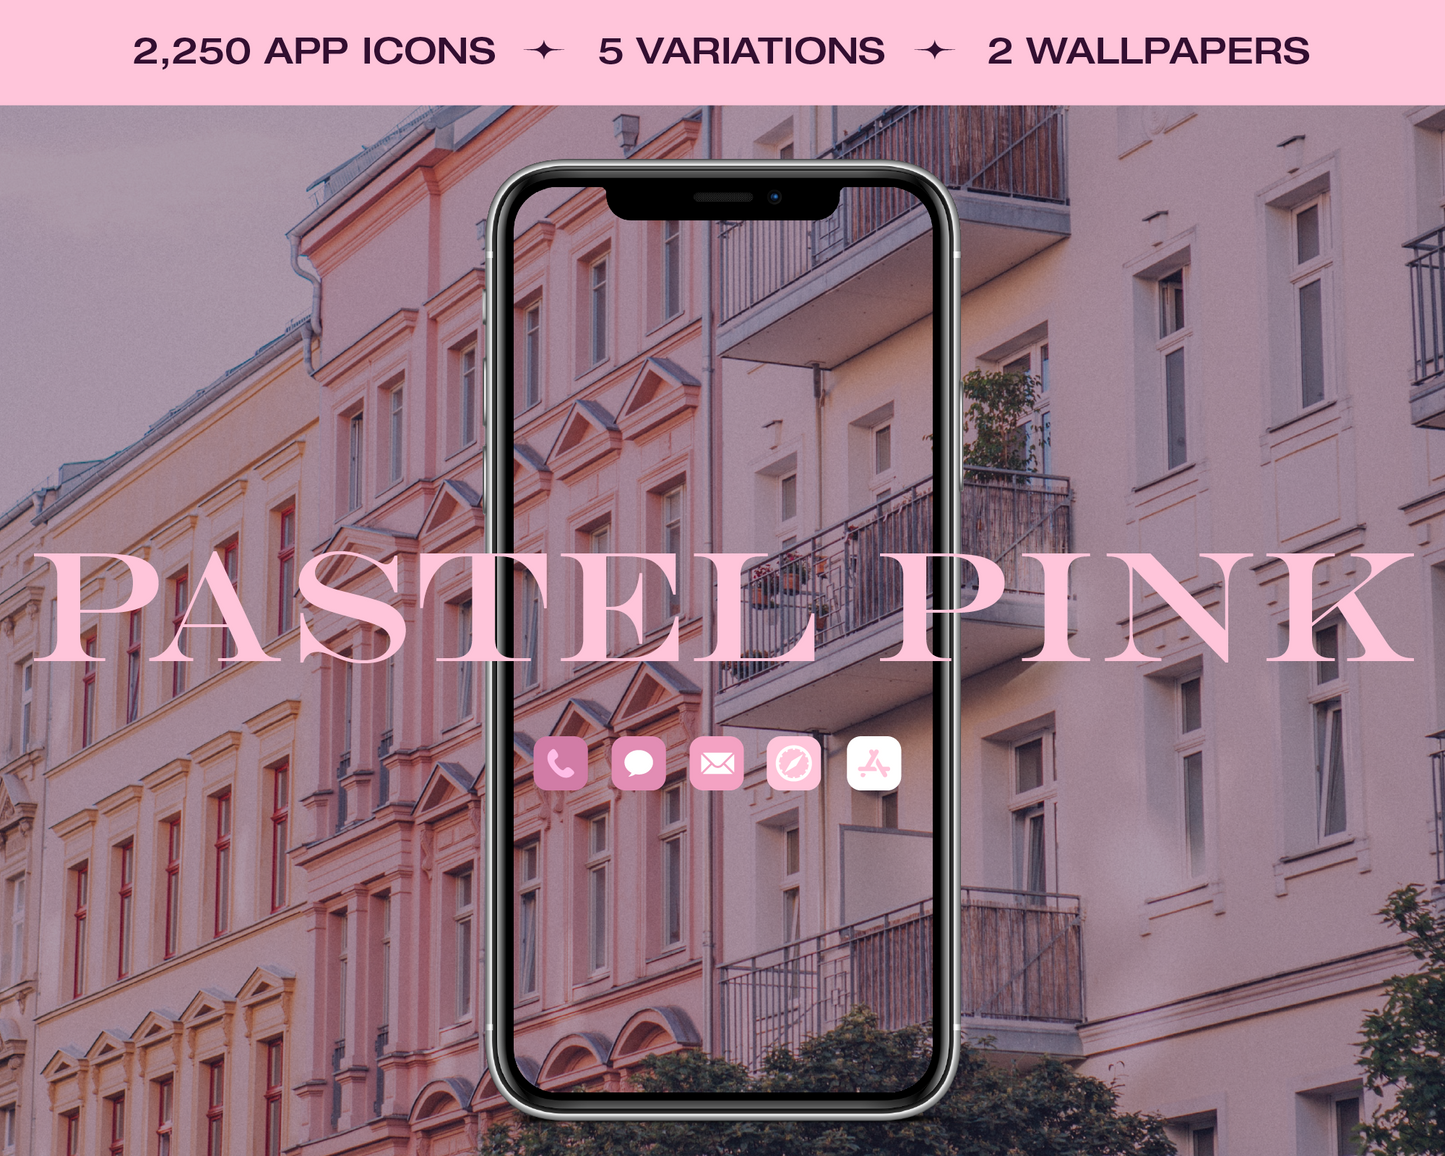 Pastel Pink App Icon Pack for iOS